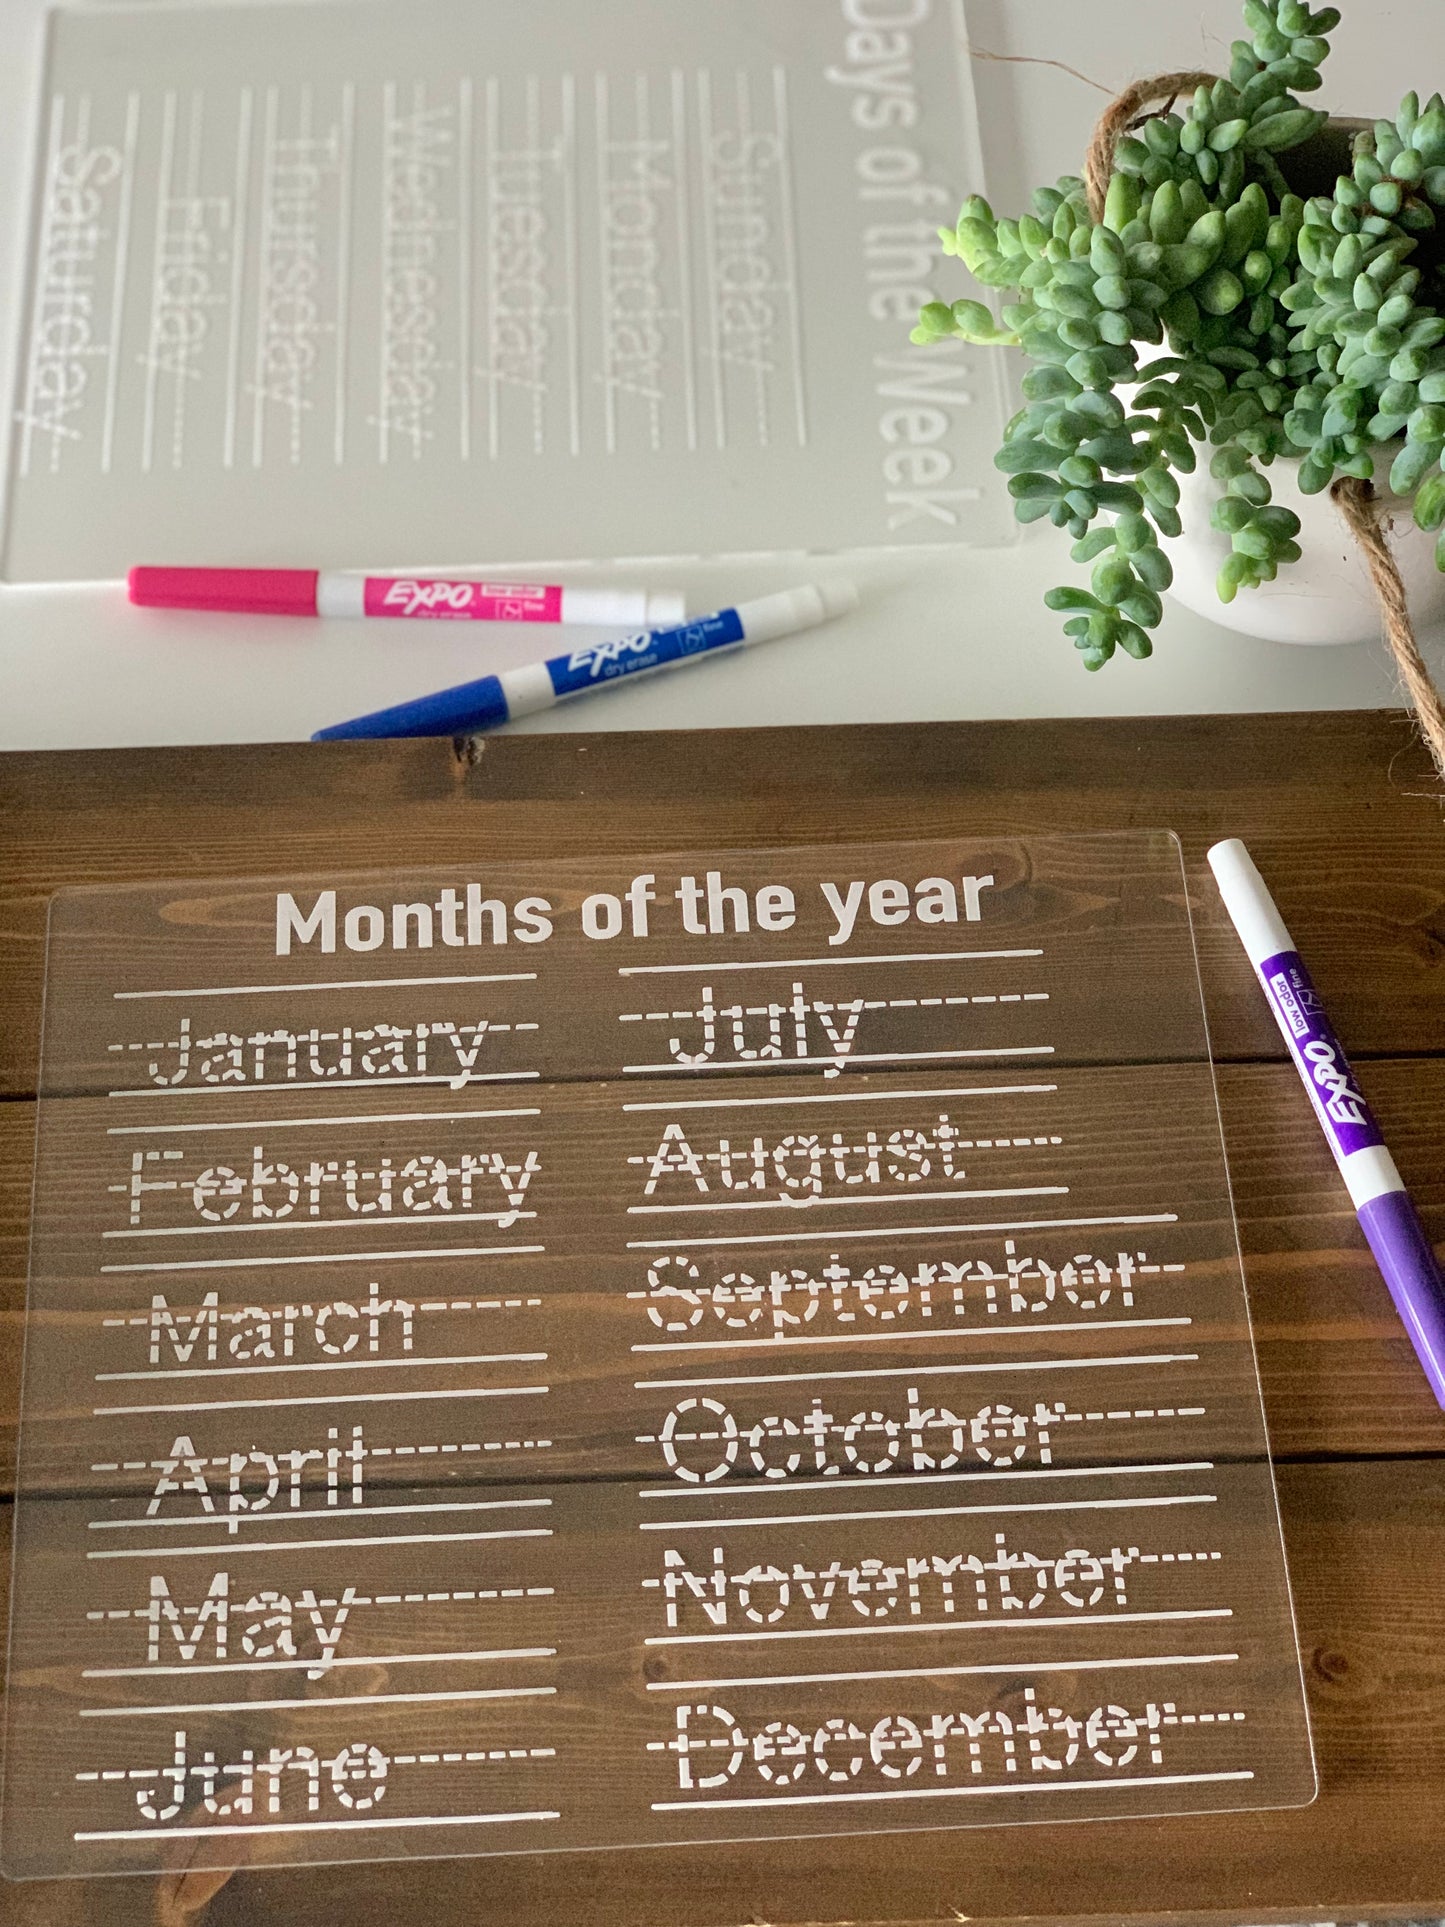 Months of the Year Acrylic Dry Erase Board